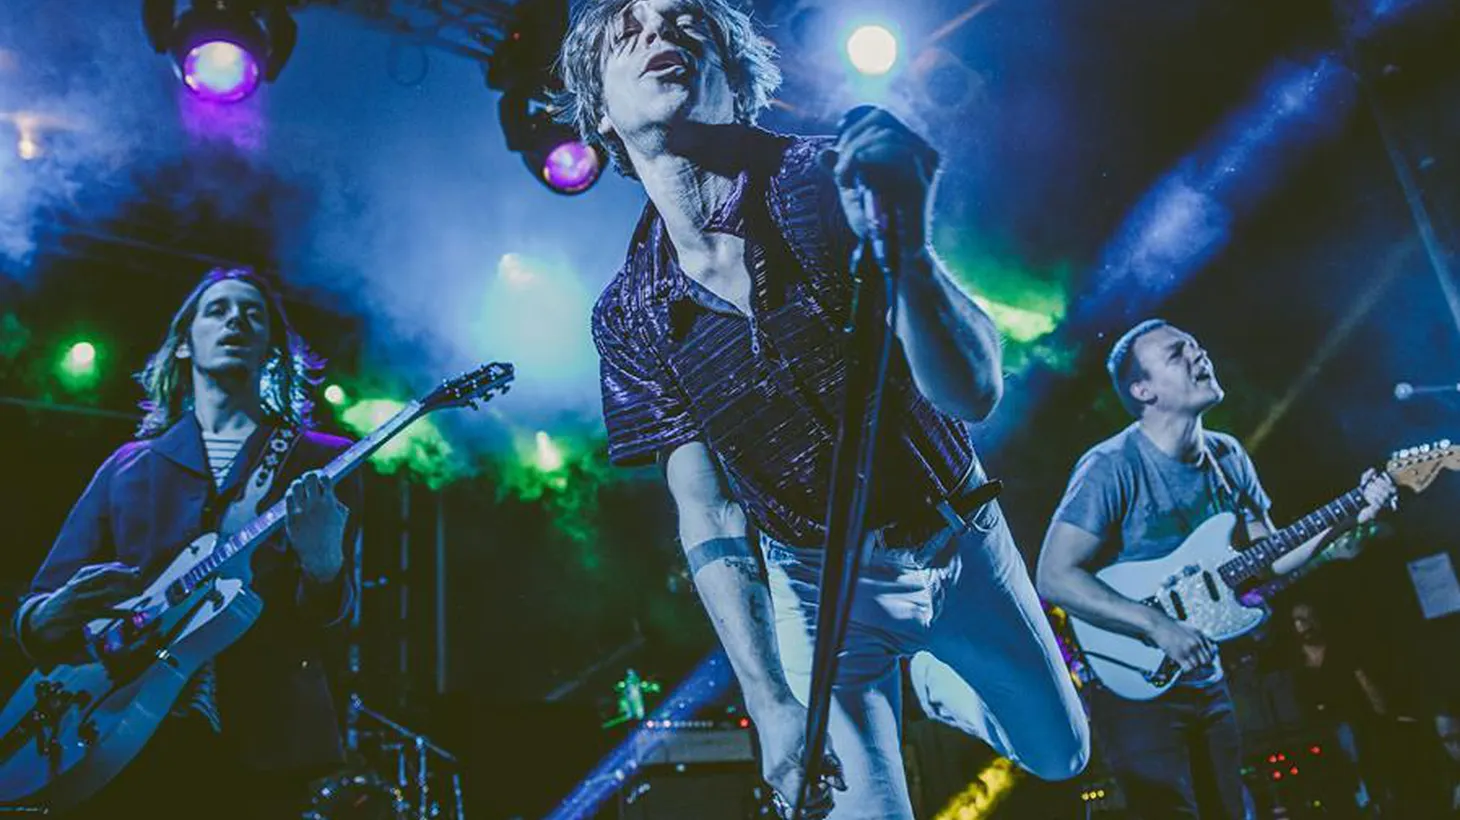 Kentucky rockers Cage the Elephant blasted back with their third album.